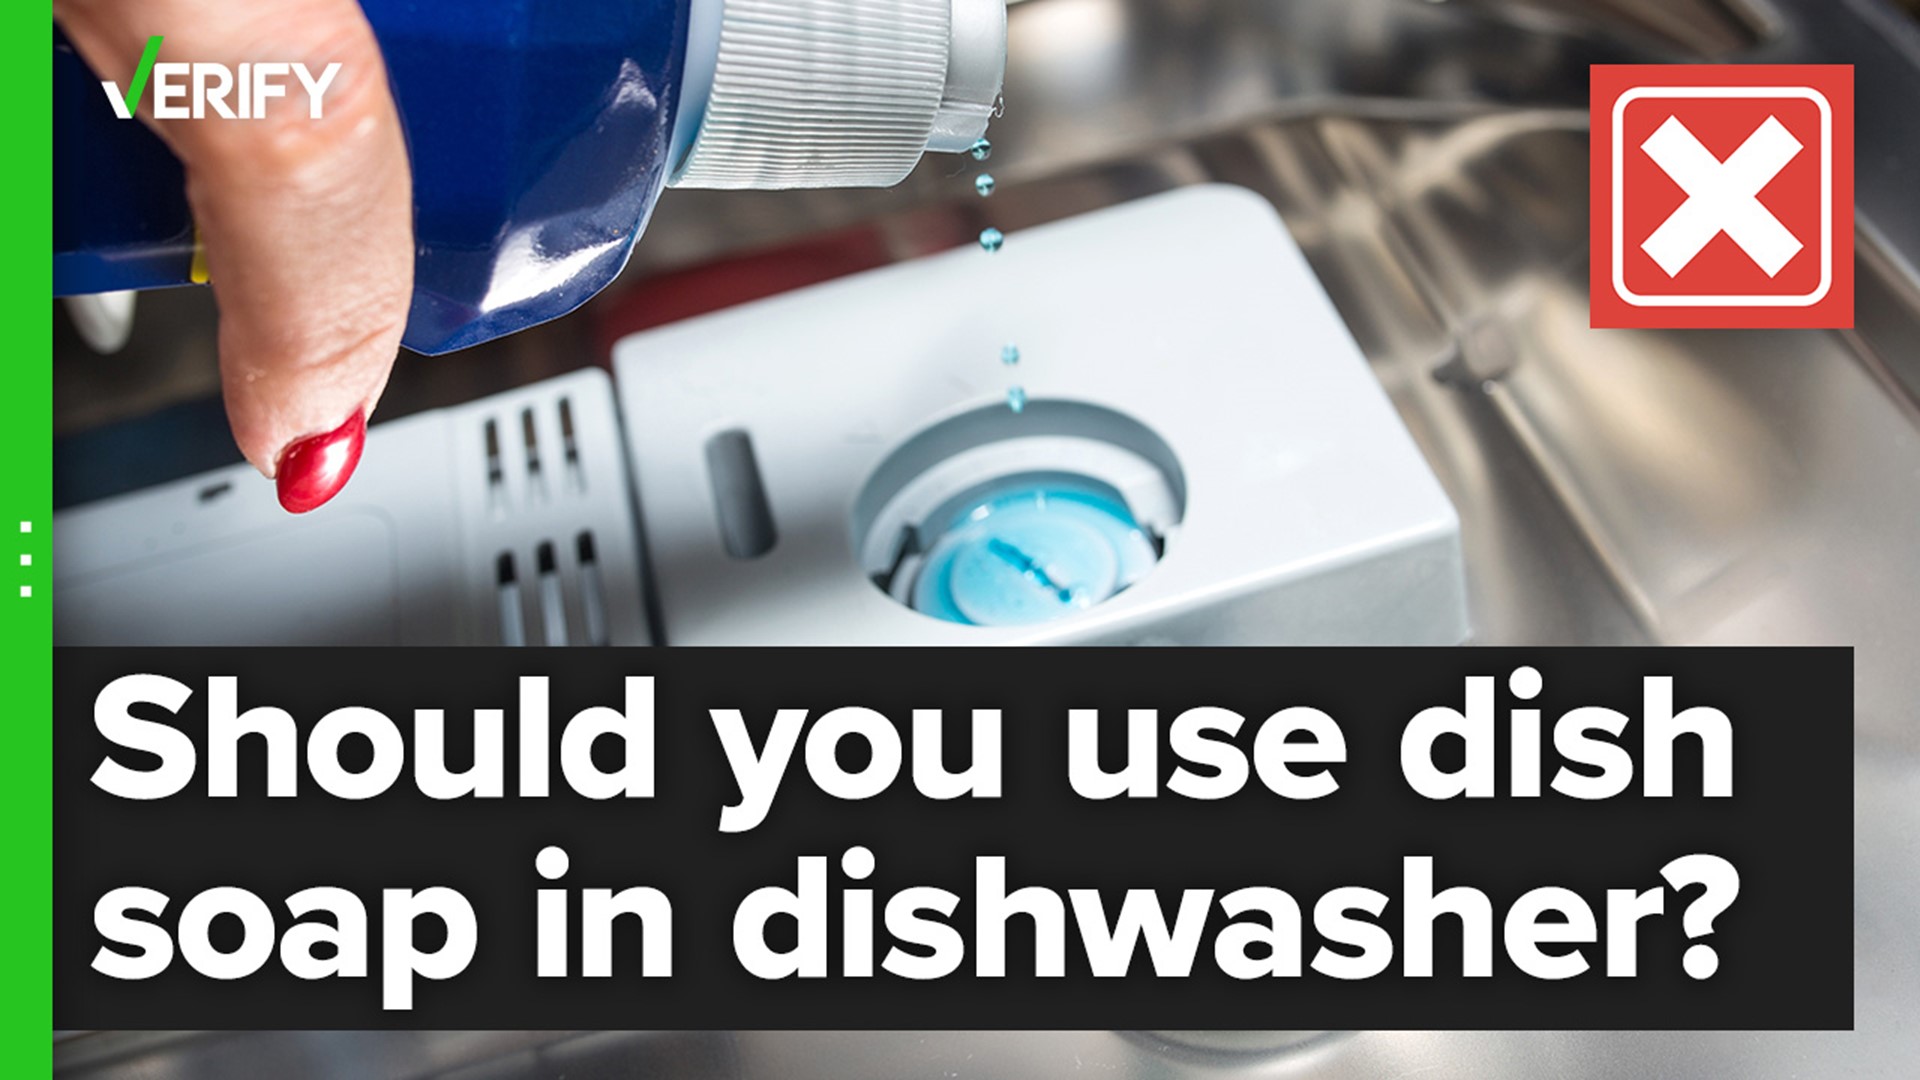 Even small amounts of dish soap in the dishwasher creates suds that can damage the machine without really washing the dishes.